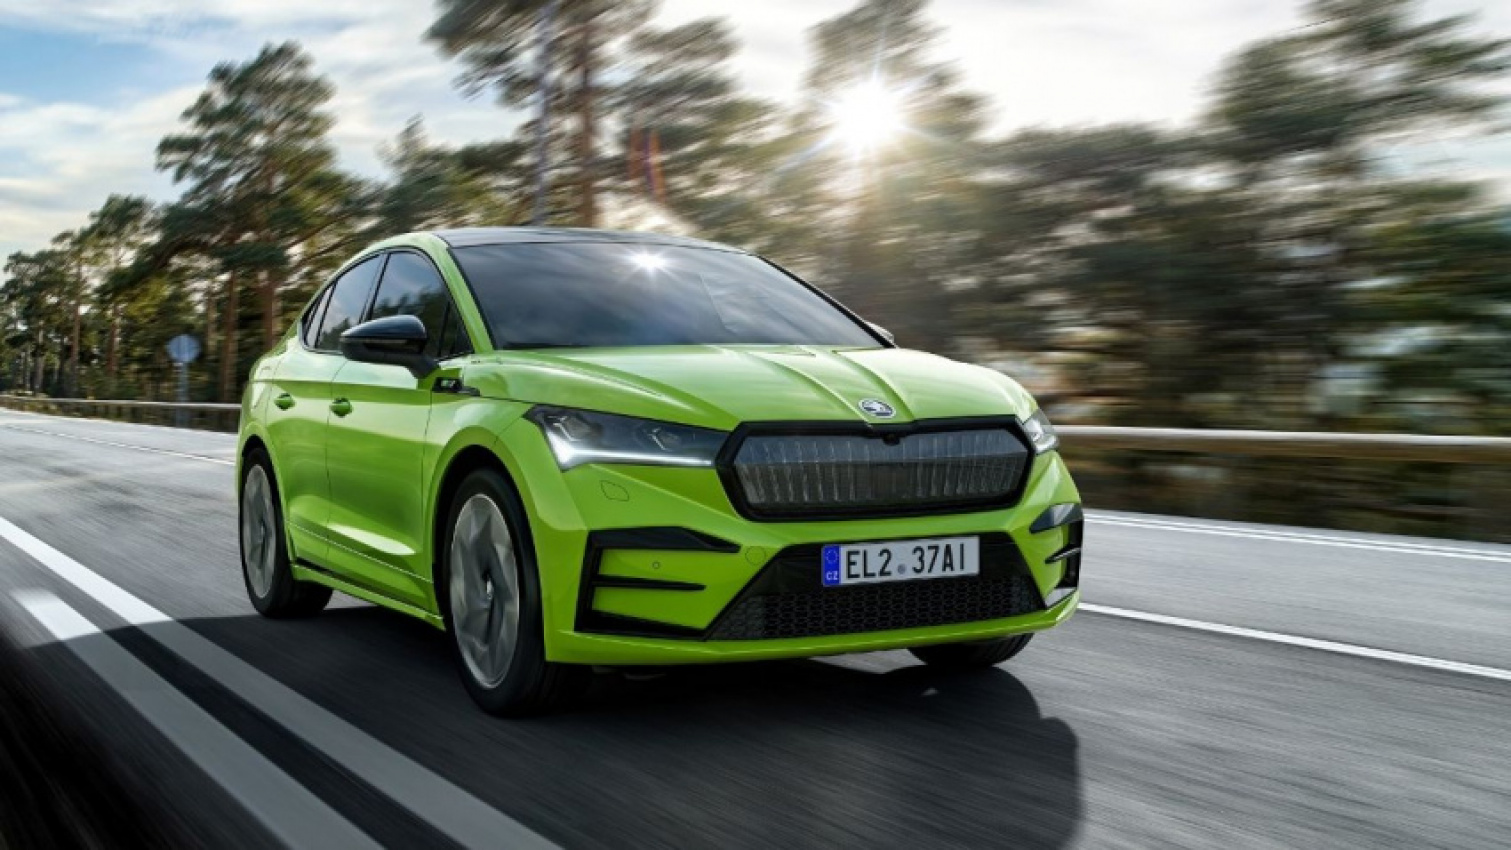 autos, cars, ford, auto news, carandbike, electric vehicle, news, skoda auto, skoda auto india, skoda ev, volkswagen group, vw ev, india can serve as hub for affordable evs in future, says skoda auto ceo